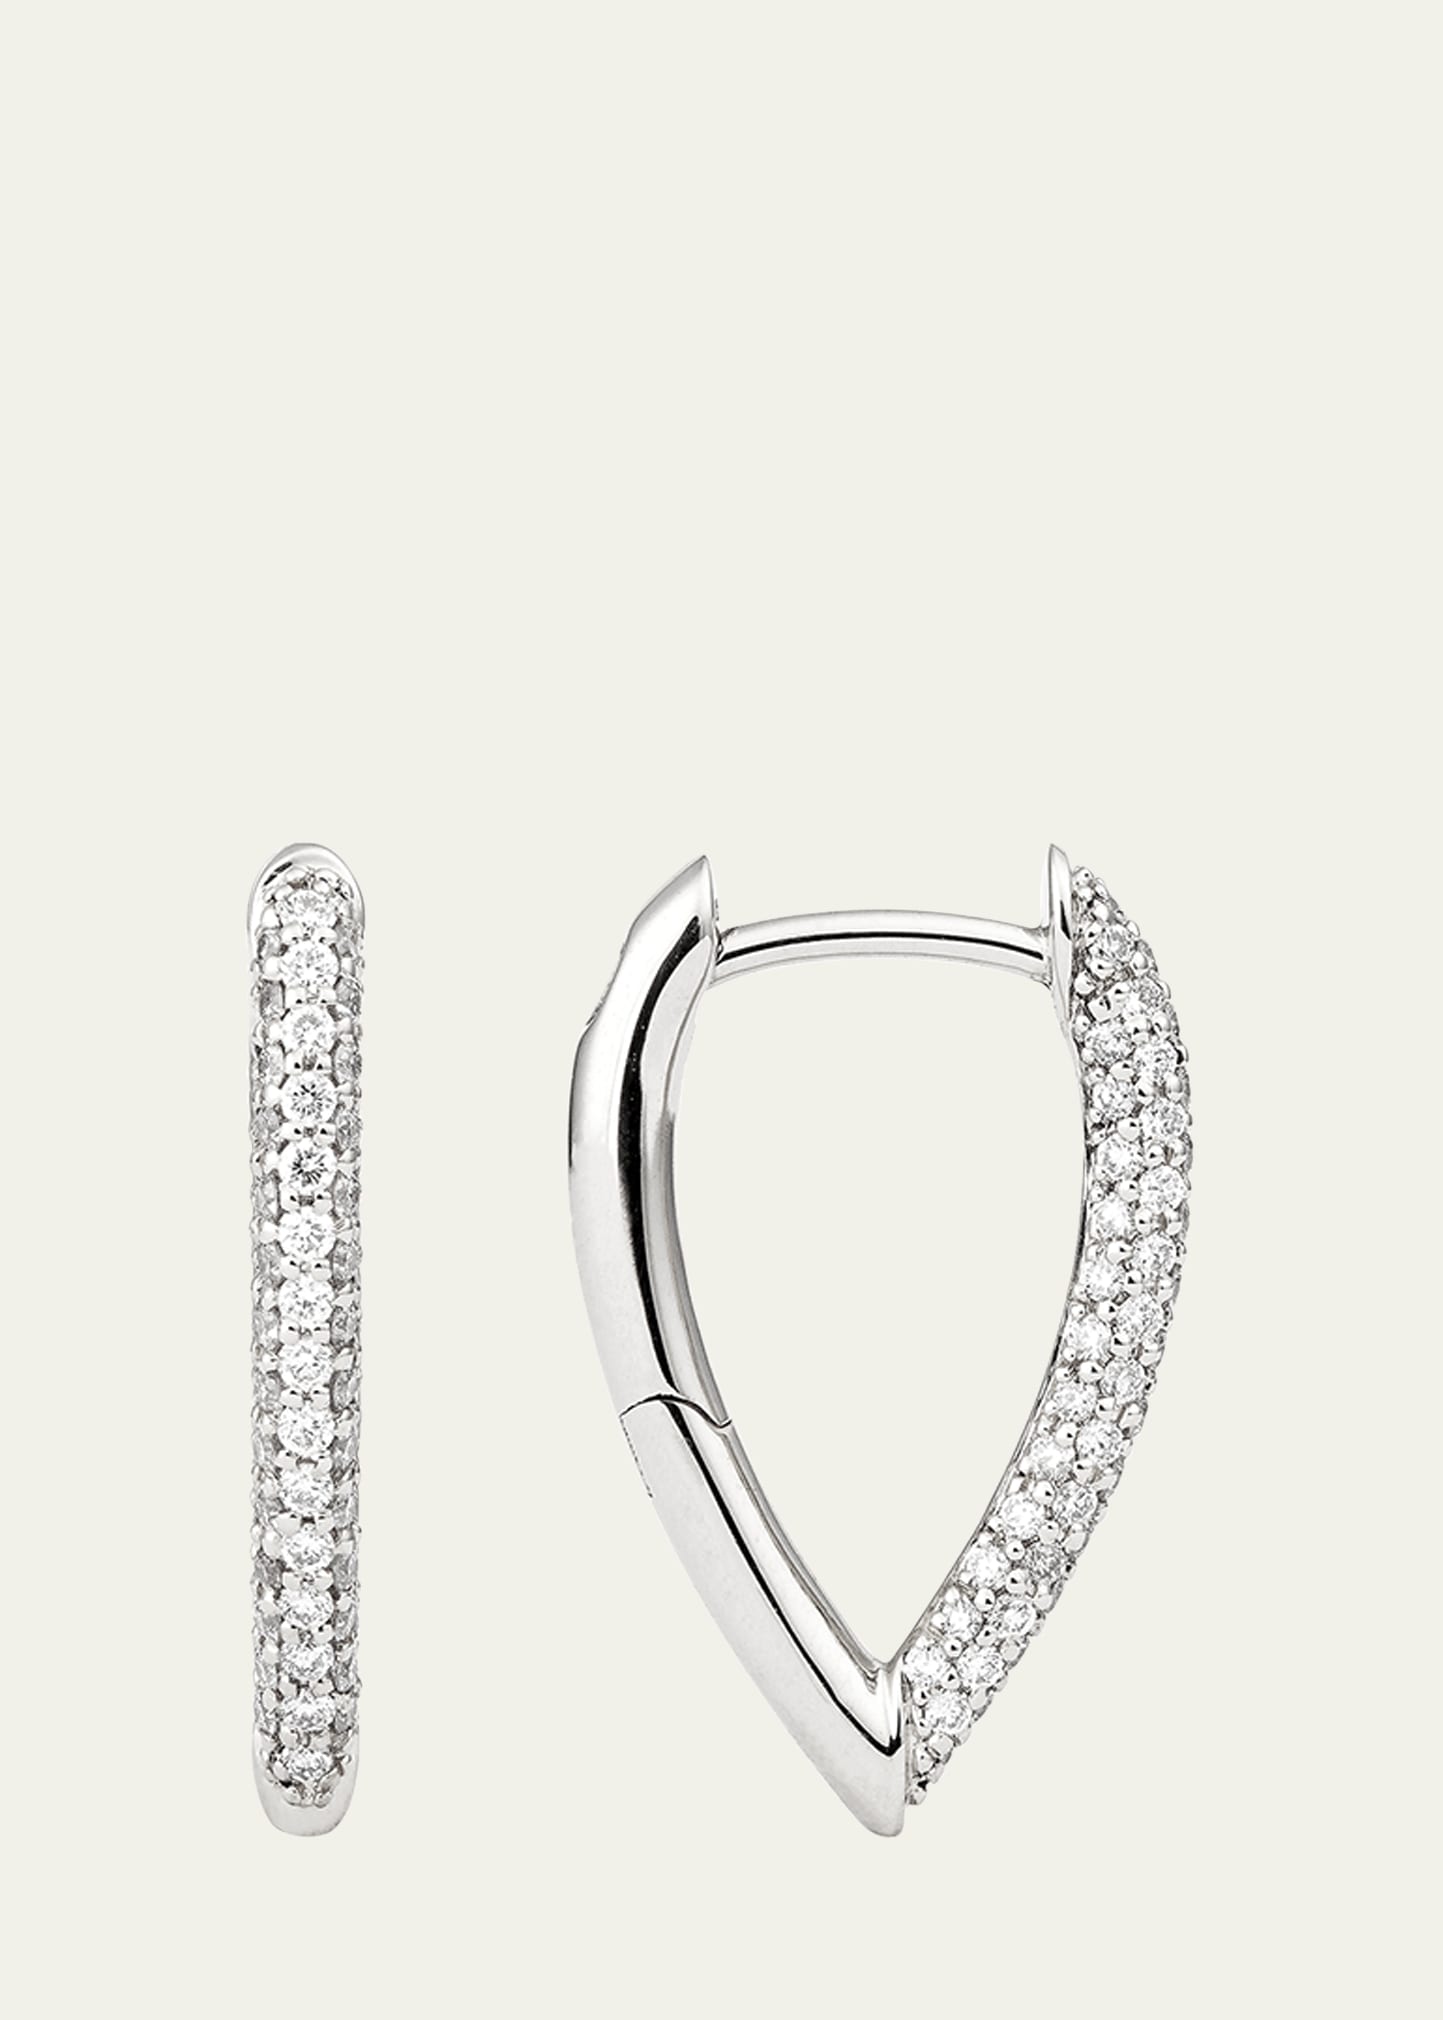 The Drop Link Earrings, Mini, in White Gold and White Diamonds